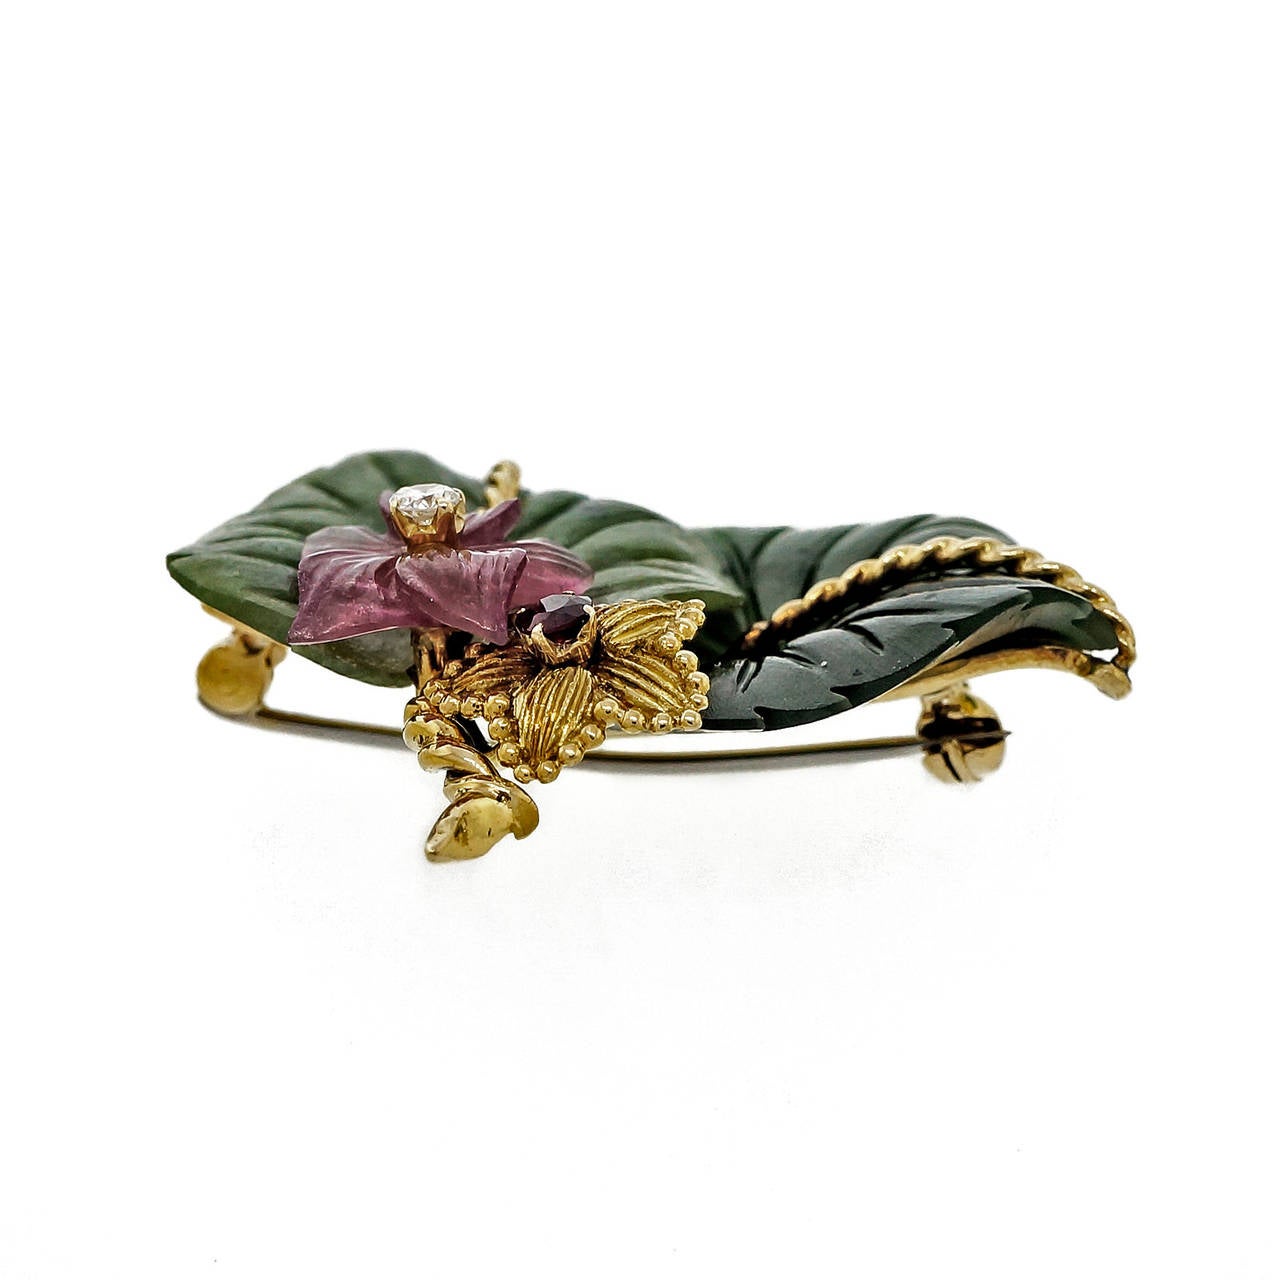 1950s Tiffany & Co Jade leaf pin in 2 colors of Nephrite Jade, pink Tourmaline, fine Ruby and diamond.

1 round fine red Ruby, approx. total weight .10ct
1 round diamond, approx. total weight .06ct, H, SI
2 Jade flowers, approx. 22mm
1 pink